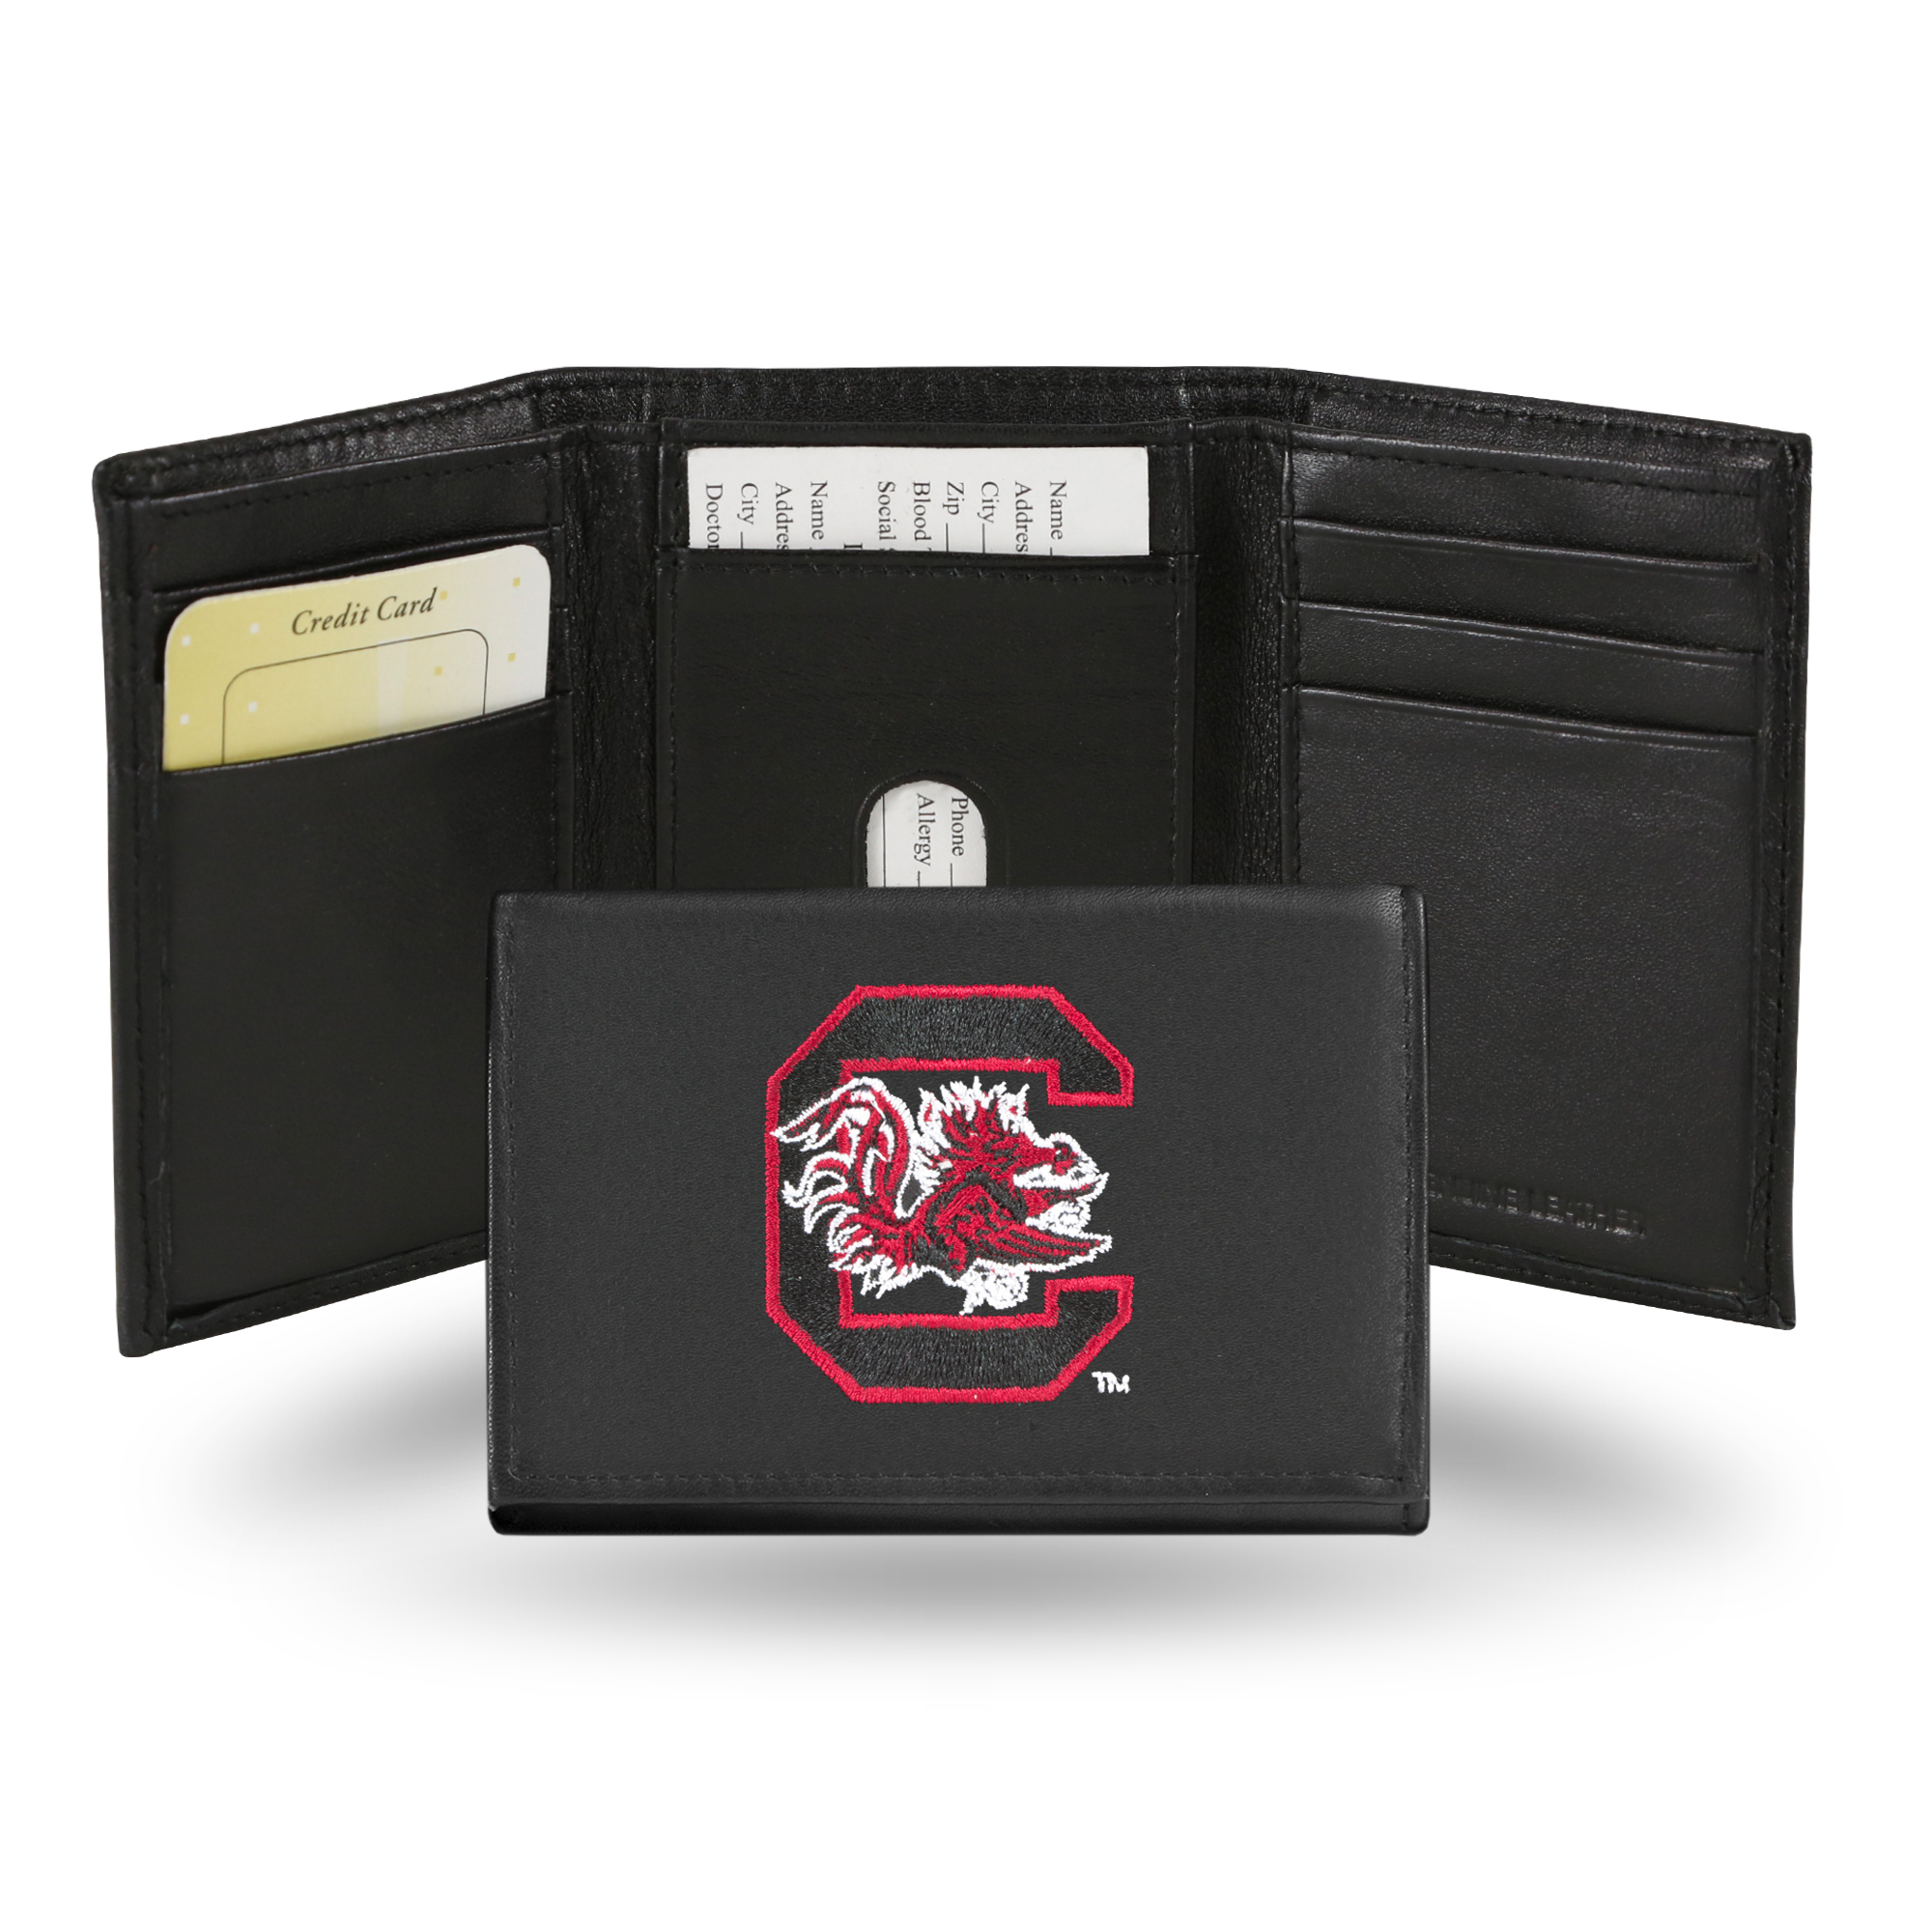 South Carolina NCAA Gamecocks Embroidered Black Leather Trifold Wallet - image 1 of 2